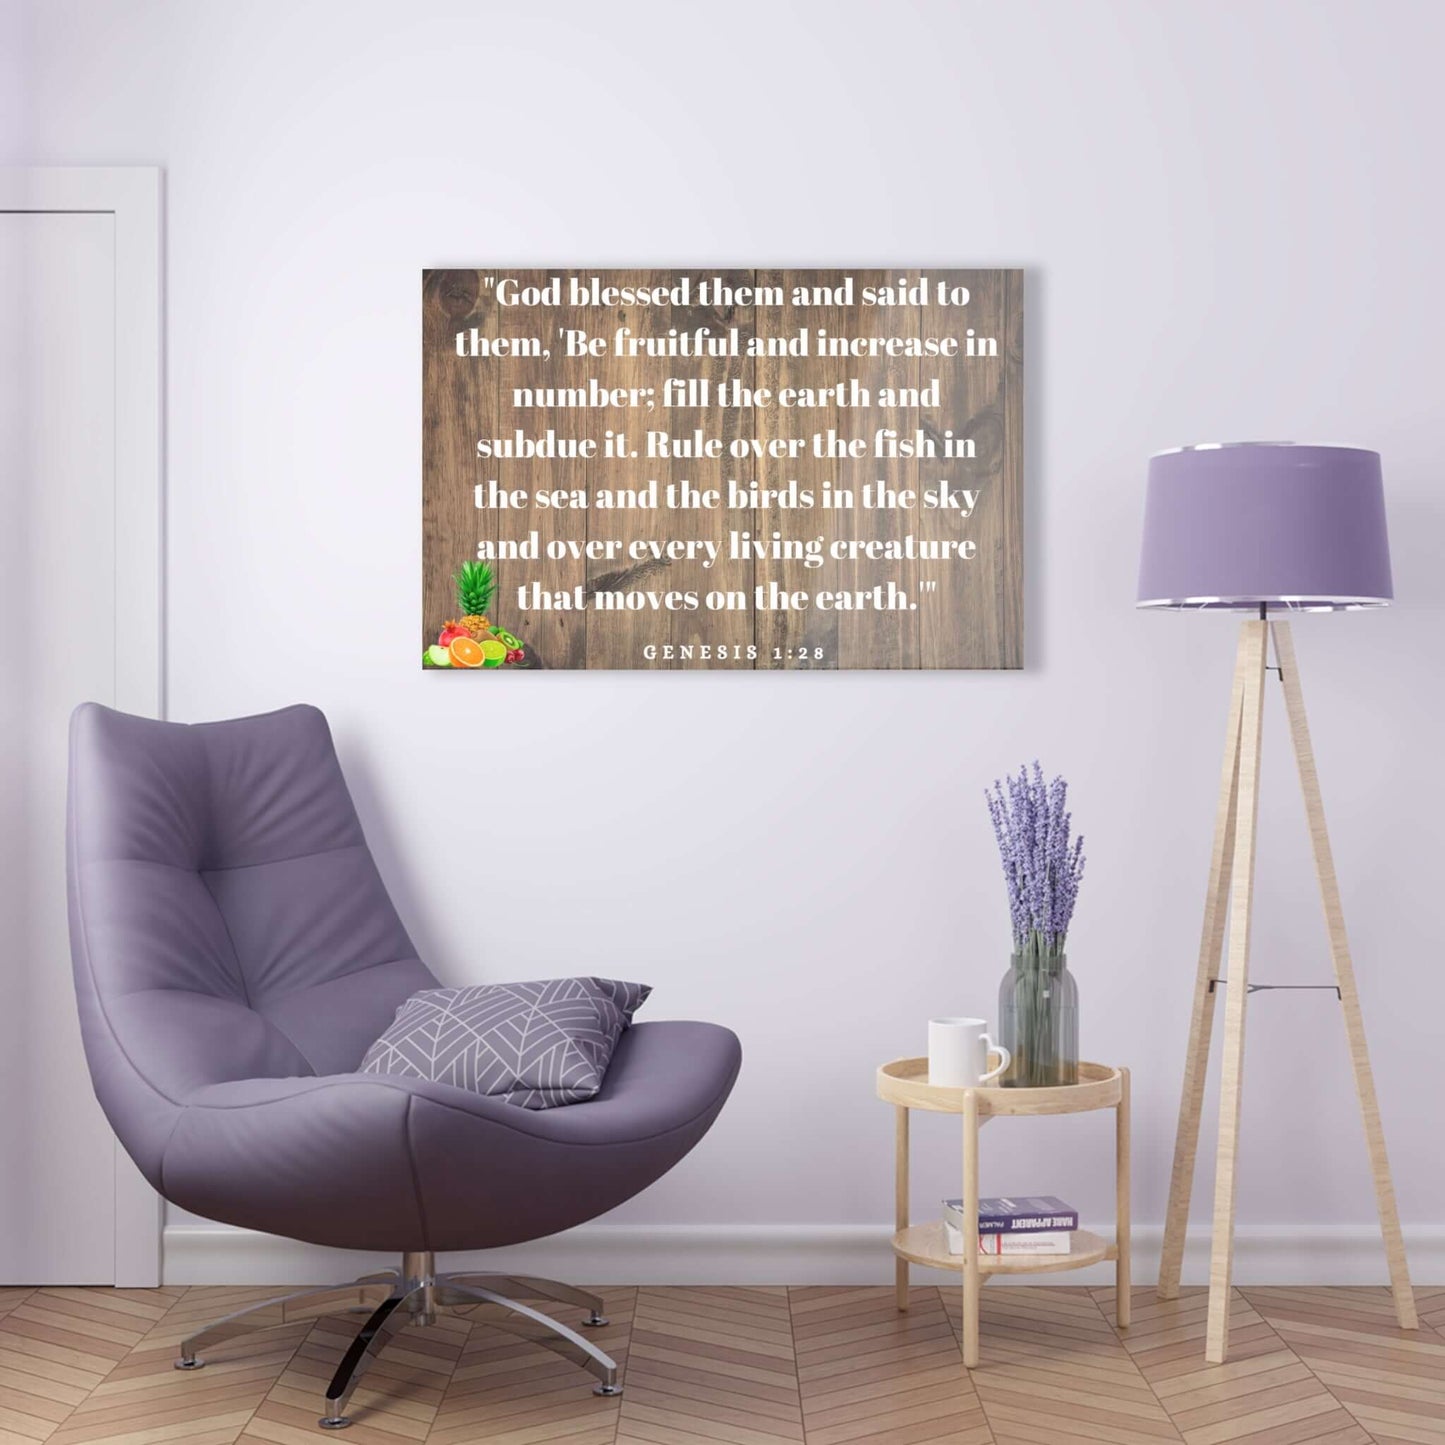 Hang Decor - Acrylic Print with Inspirational Scripture | Art & Wall Decor,Assembled in the USA,Assembled in USA,Decor,Home & Living,Home Decor,Indoor,Made in the USA,Made in USA,Poster